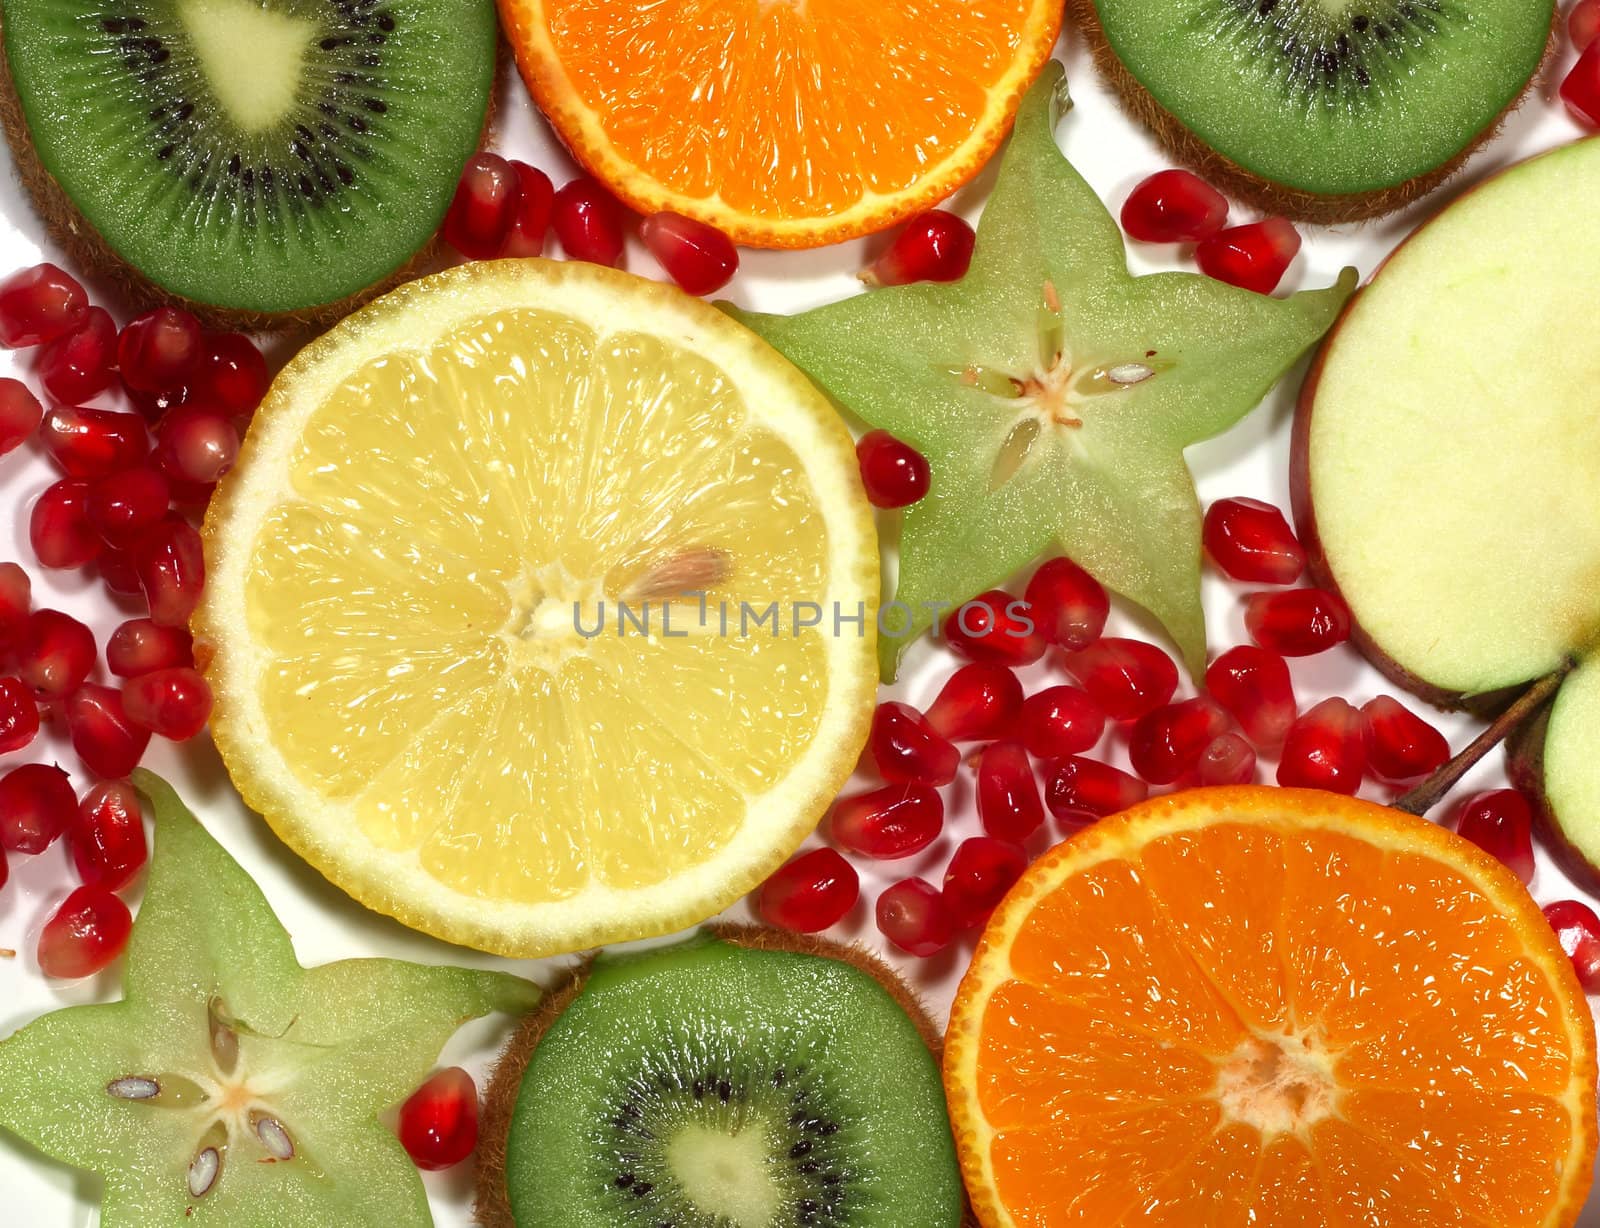 Fruit background with different cross sections of colorful fruits